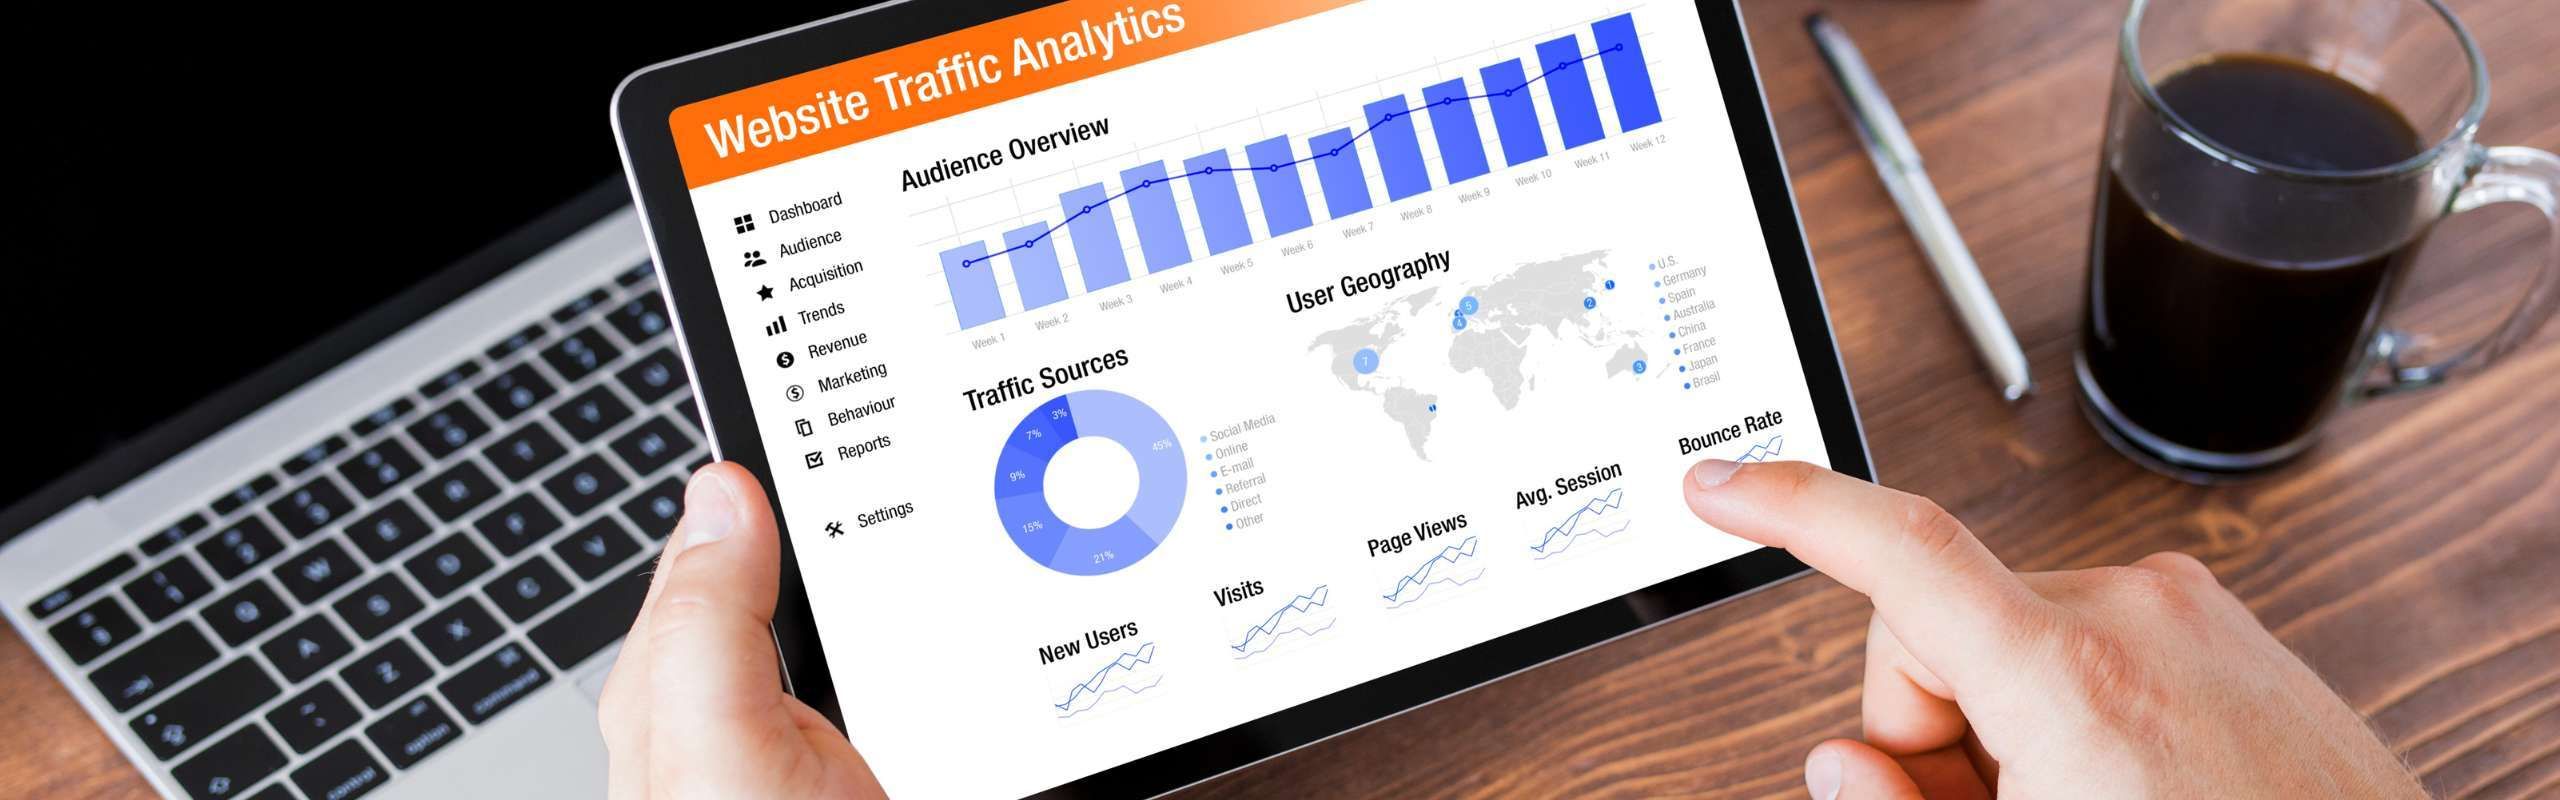 How to Use Google Analytics to Improve Your Small Business Website's User Experience How to Use Google Analytics to Improve Your Small Business Website's User Experience How to Use Google Analytics to Improve Your Small Business Website's User Experience